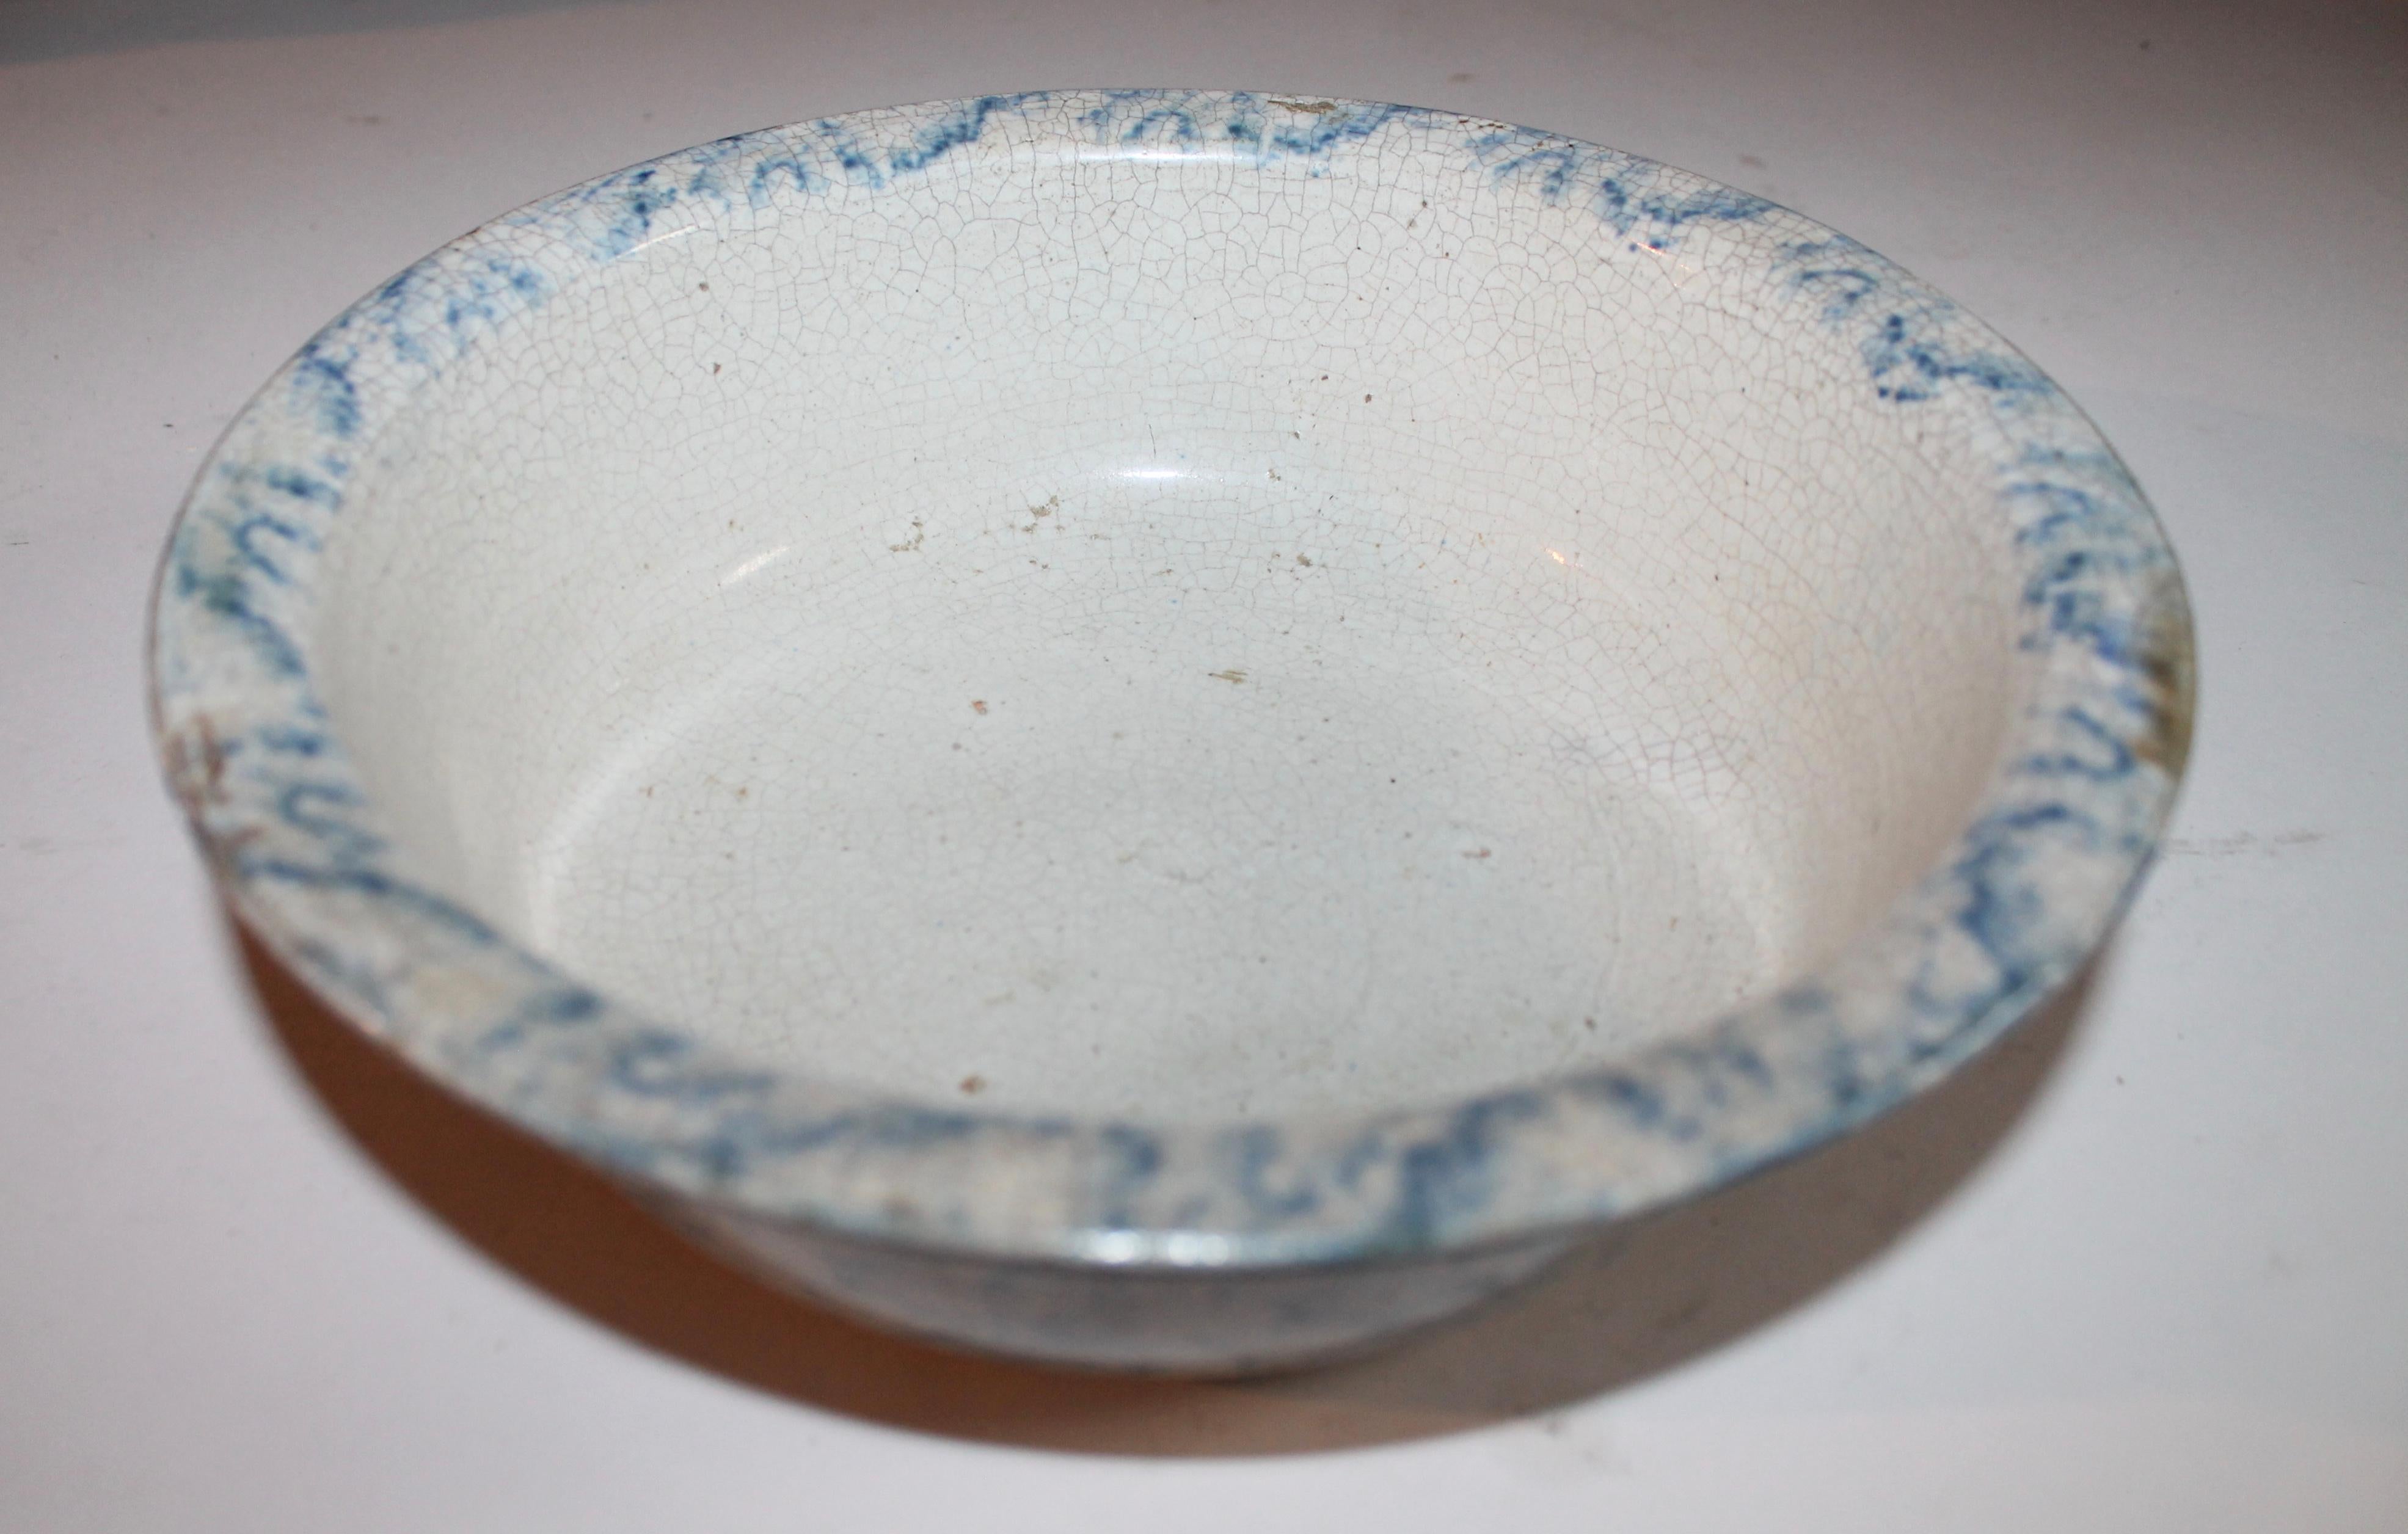 19th century spongeware pottery bowl in good condition. Great bake dish in good condition.